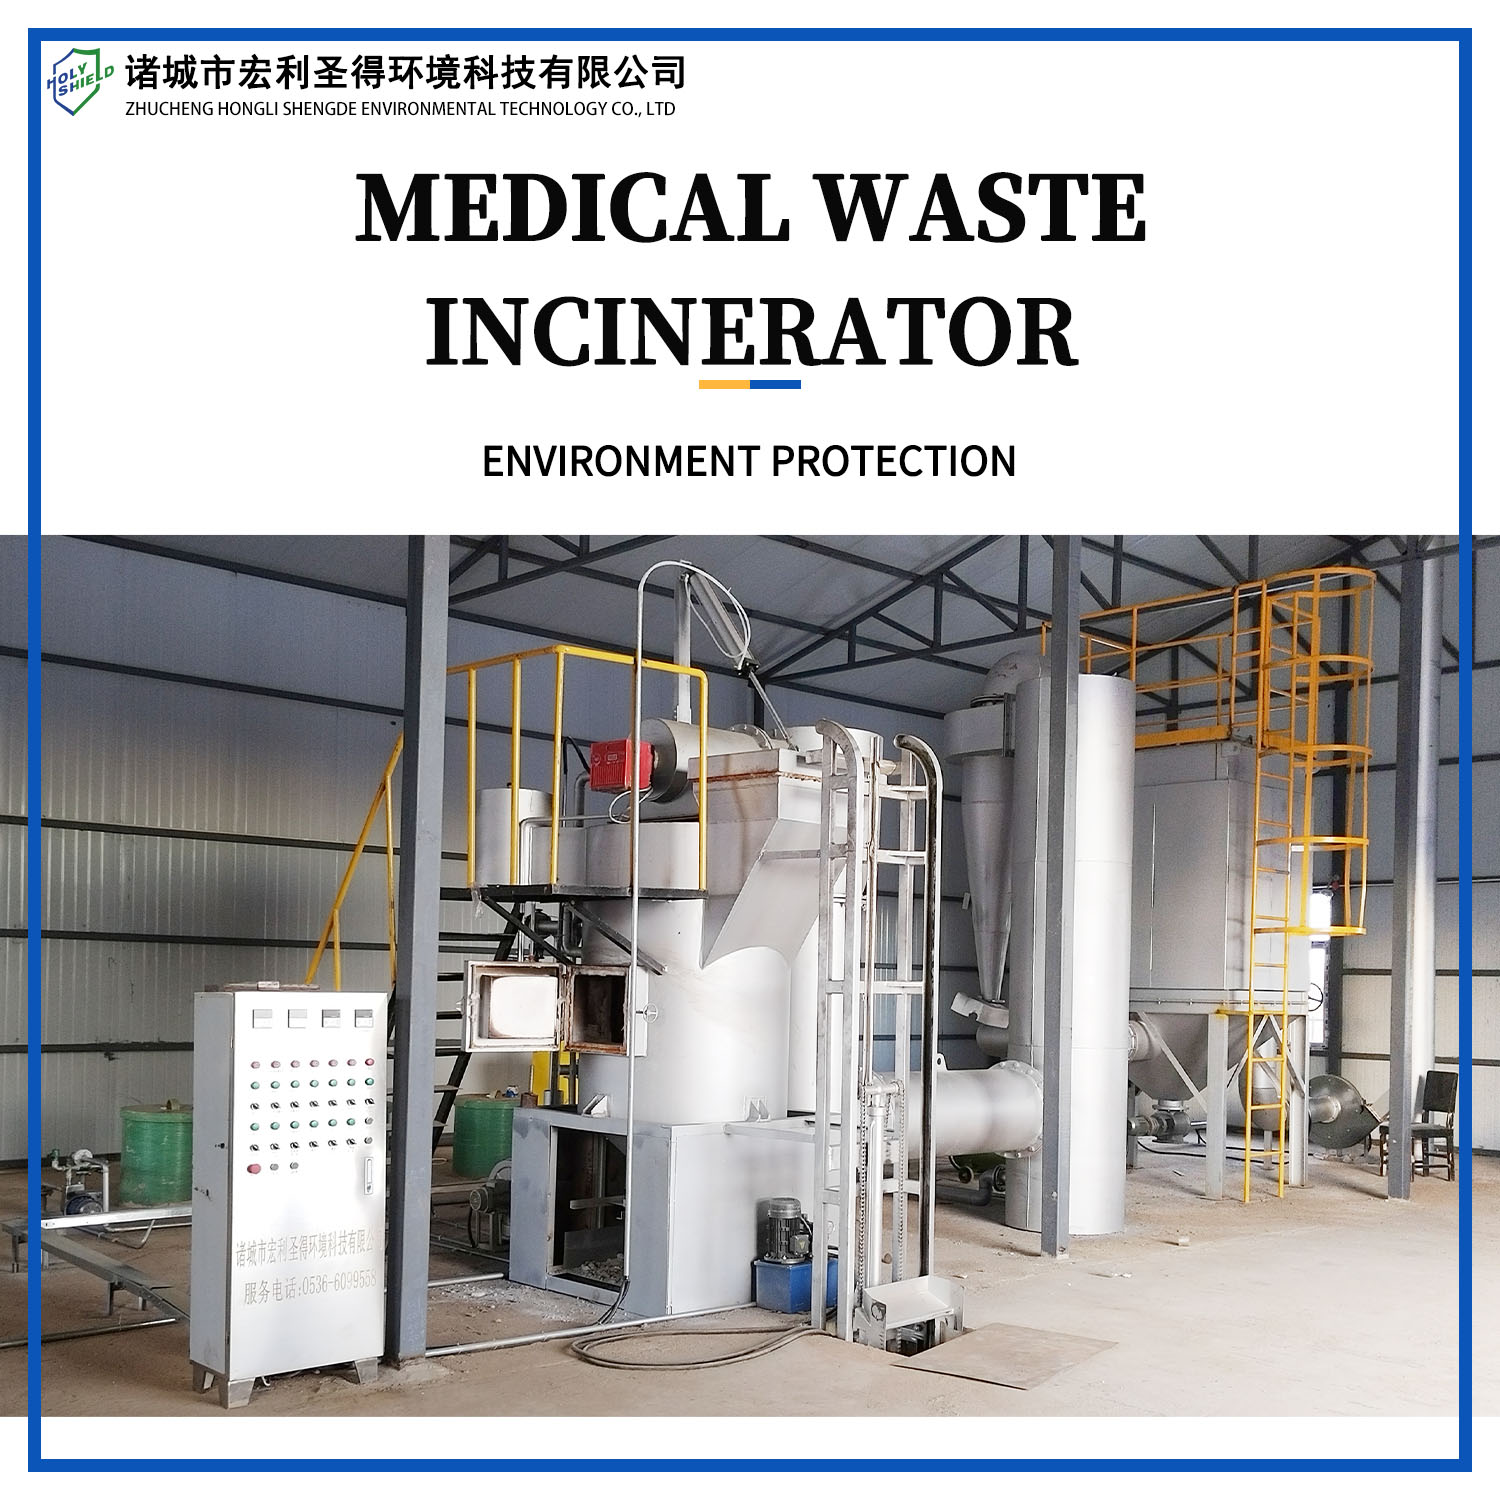 How is the medical waste generated by hospitals treated?